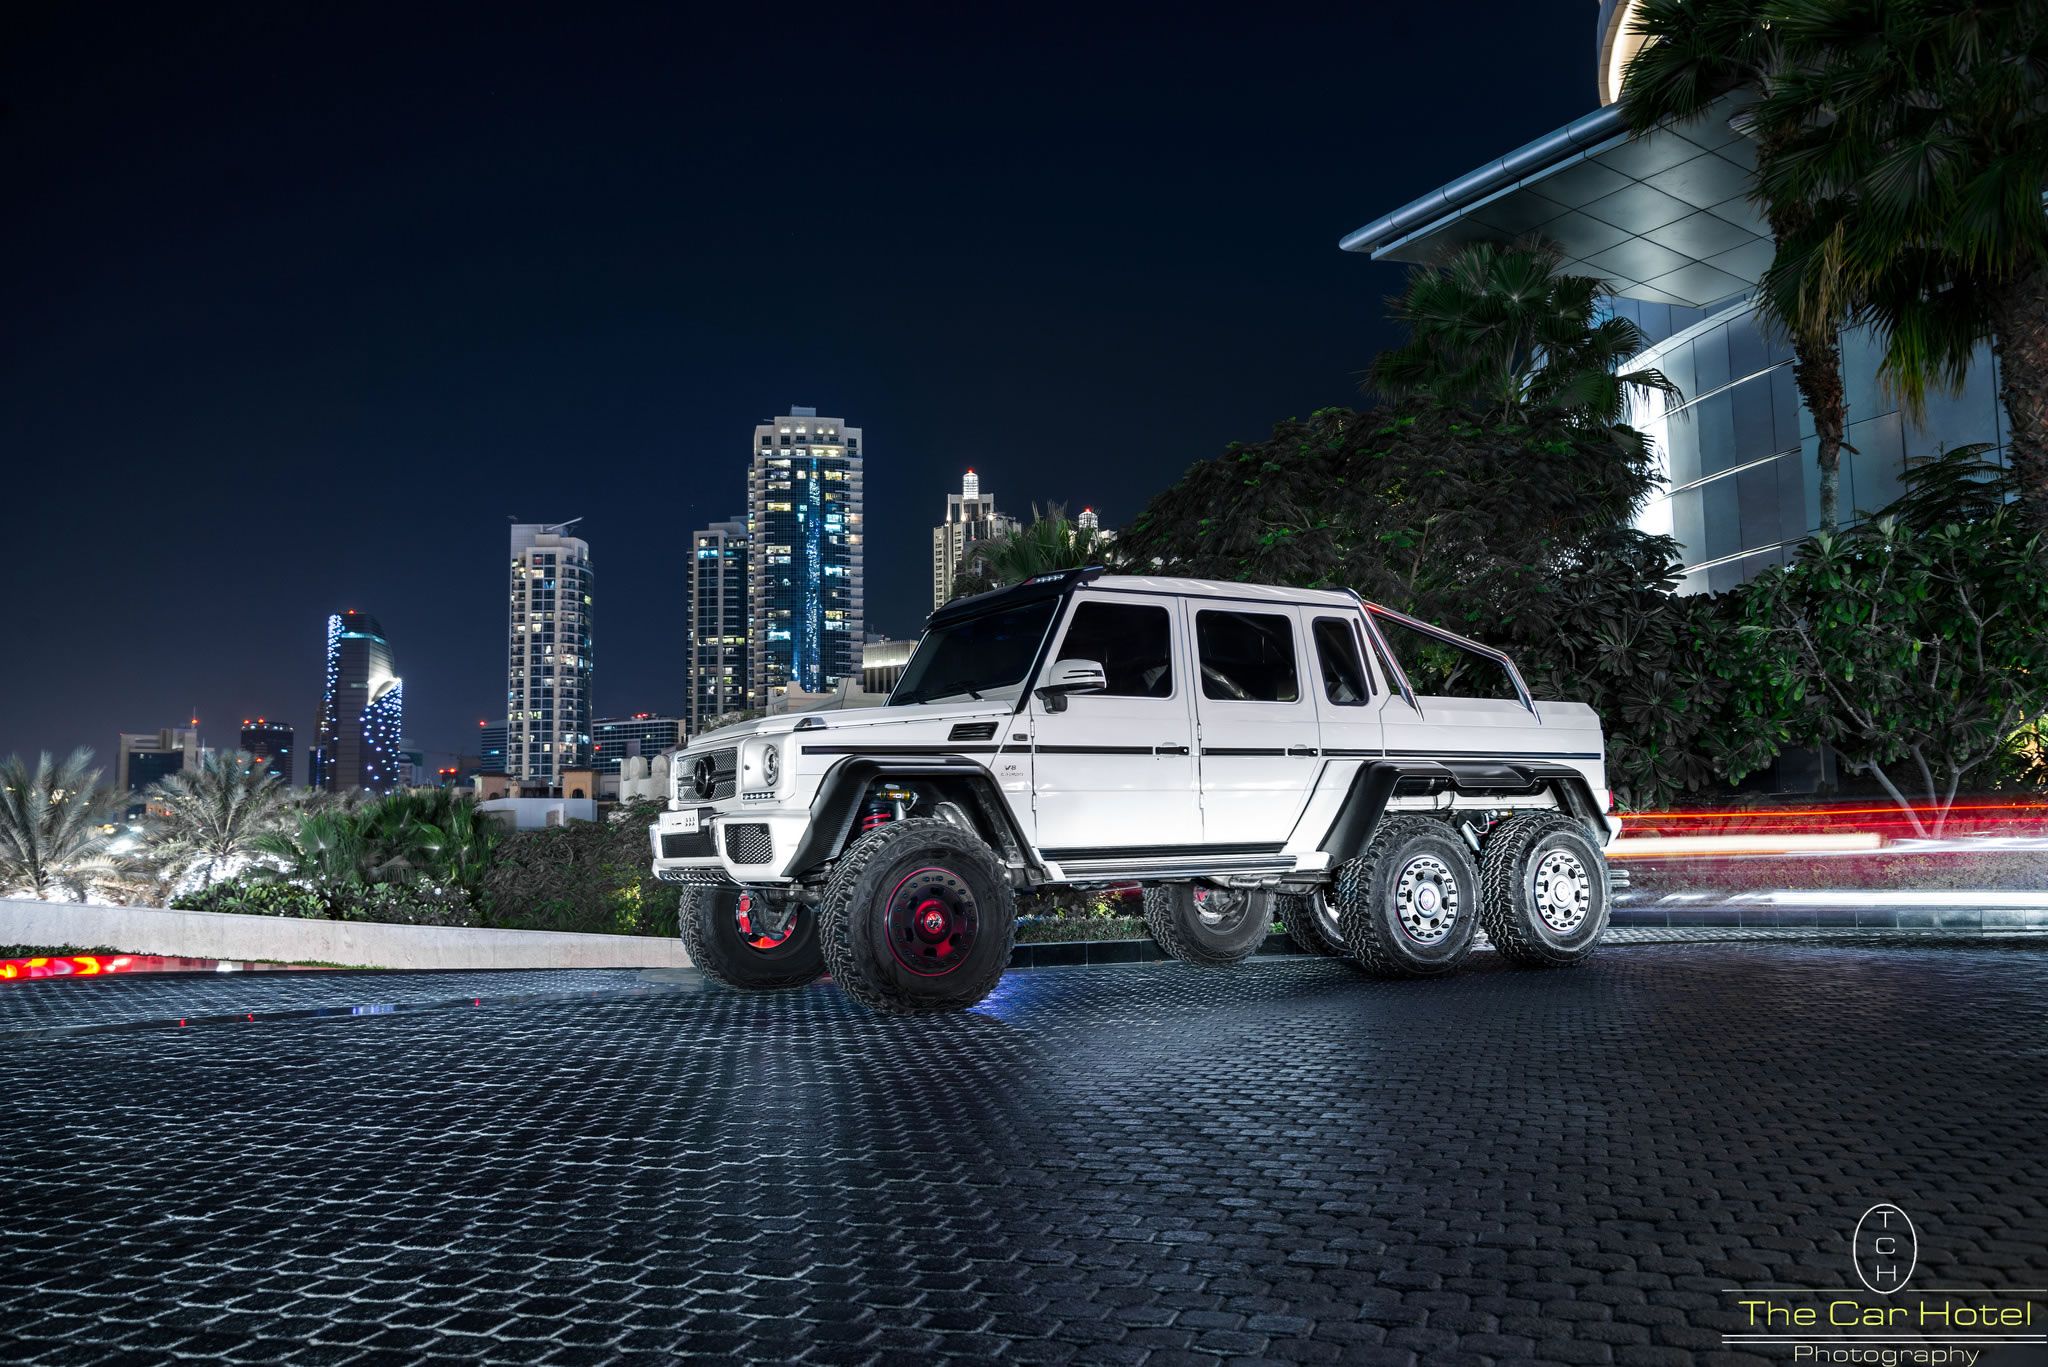 Mercedes Benz G63 AMG 6x6 In White Road Vehicel, Owned